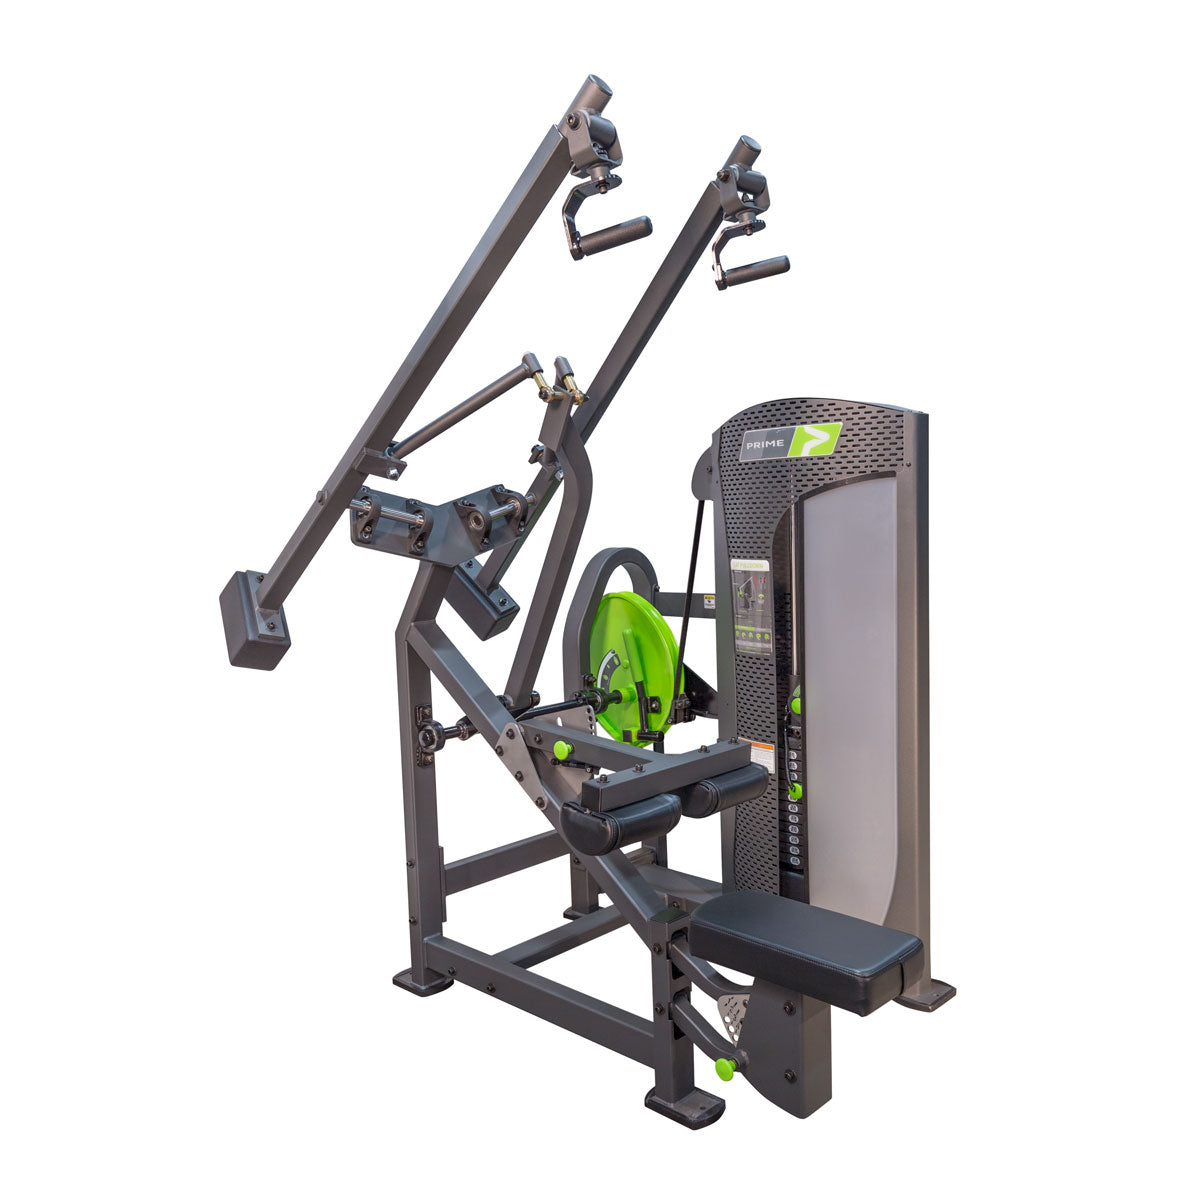 PRIME Fitness - The PRIME Evolution Seated Row. . This machine features our  SmartCam technology that provides the user the unique ability to manipulate  the resistance profile to overload different areas within